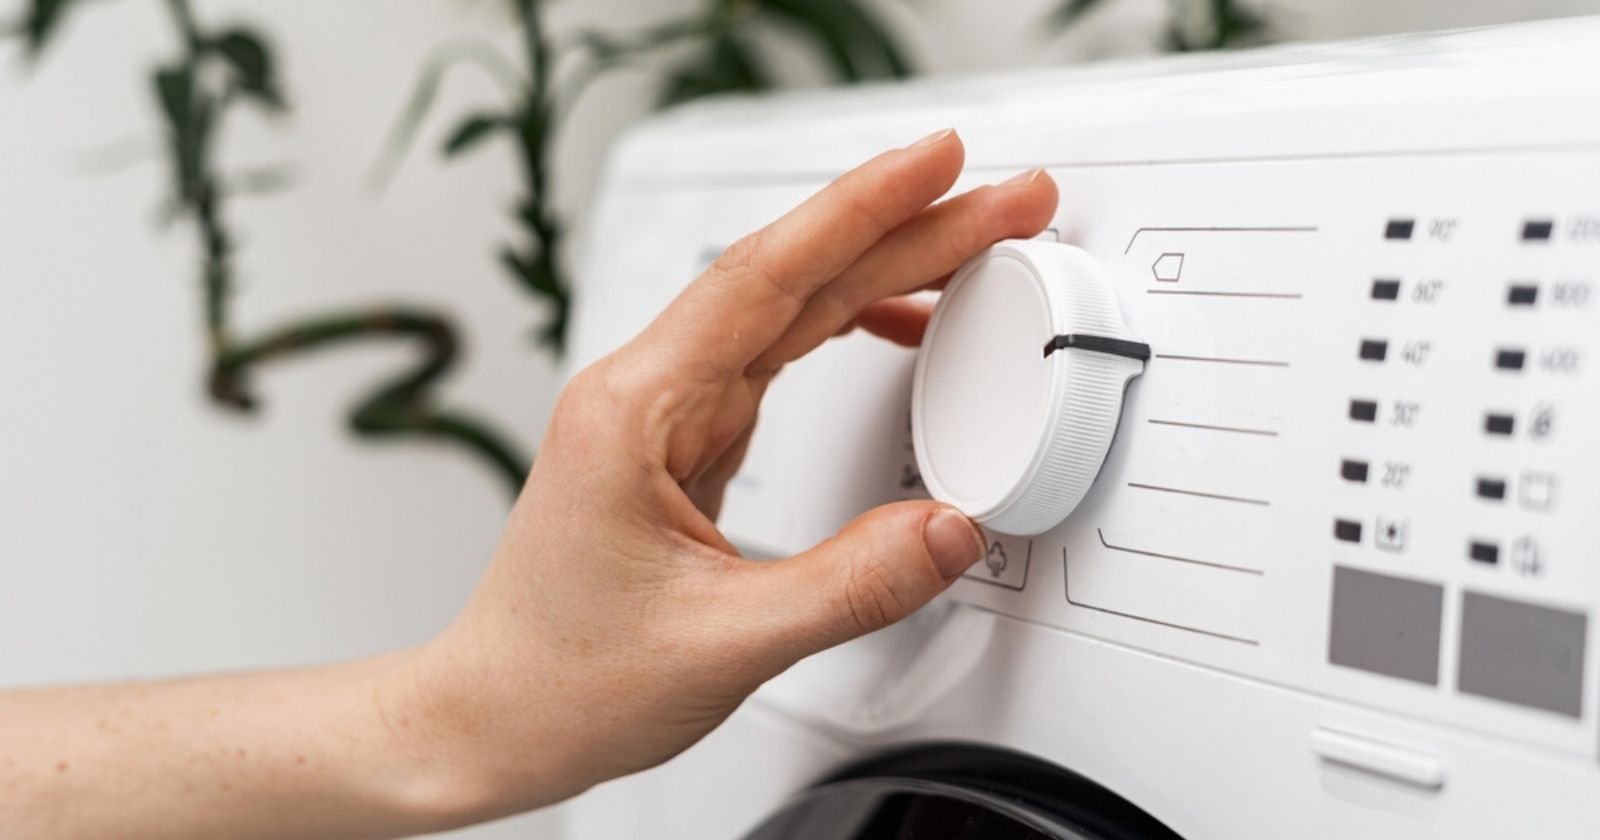 Why should you stop using your electrical appliances this Monday morning?